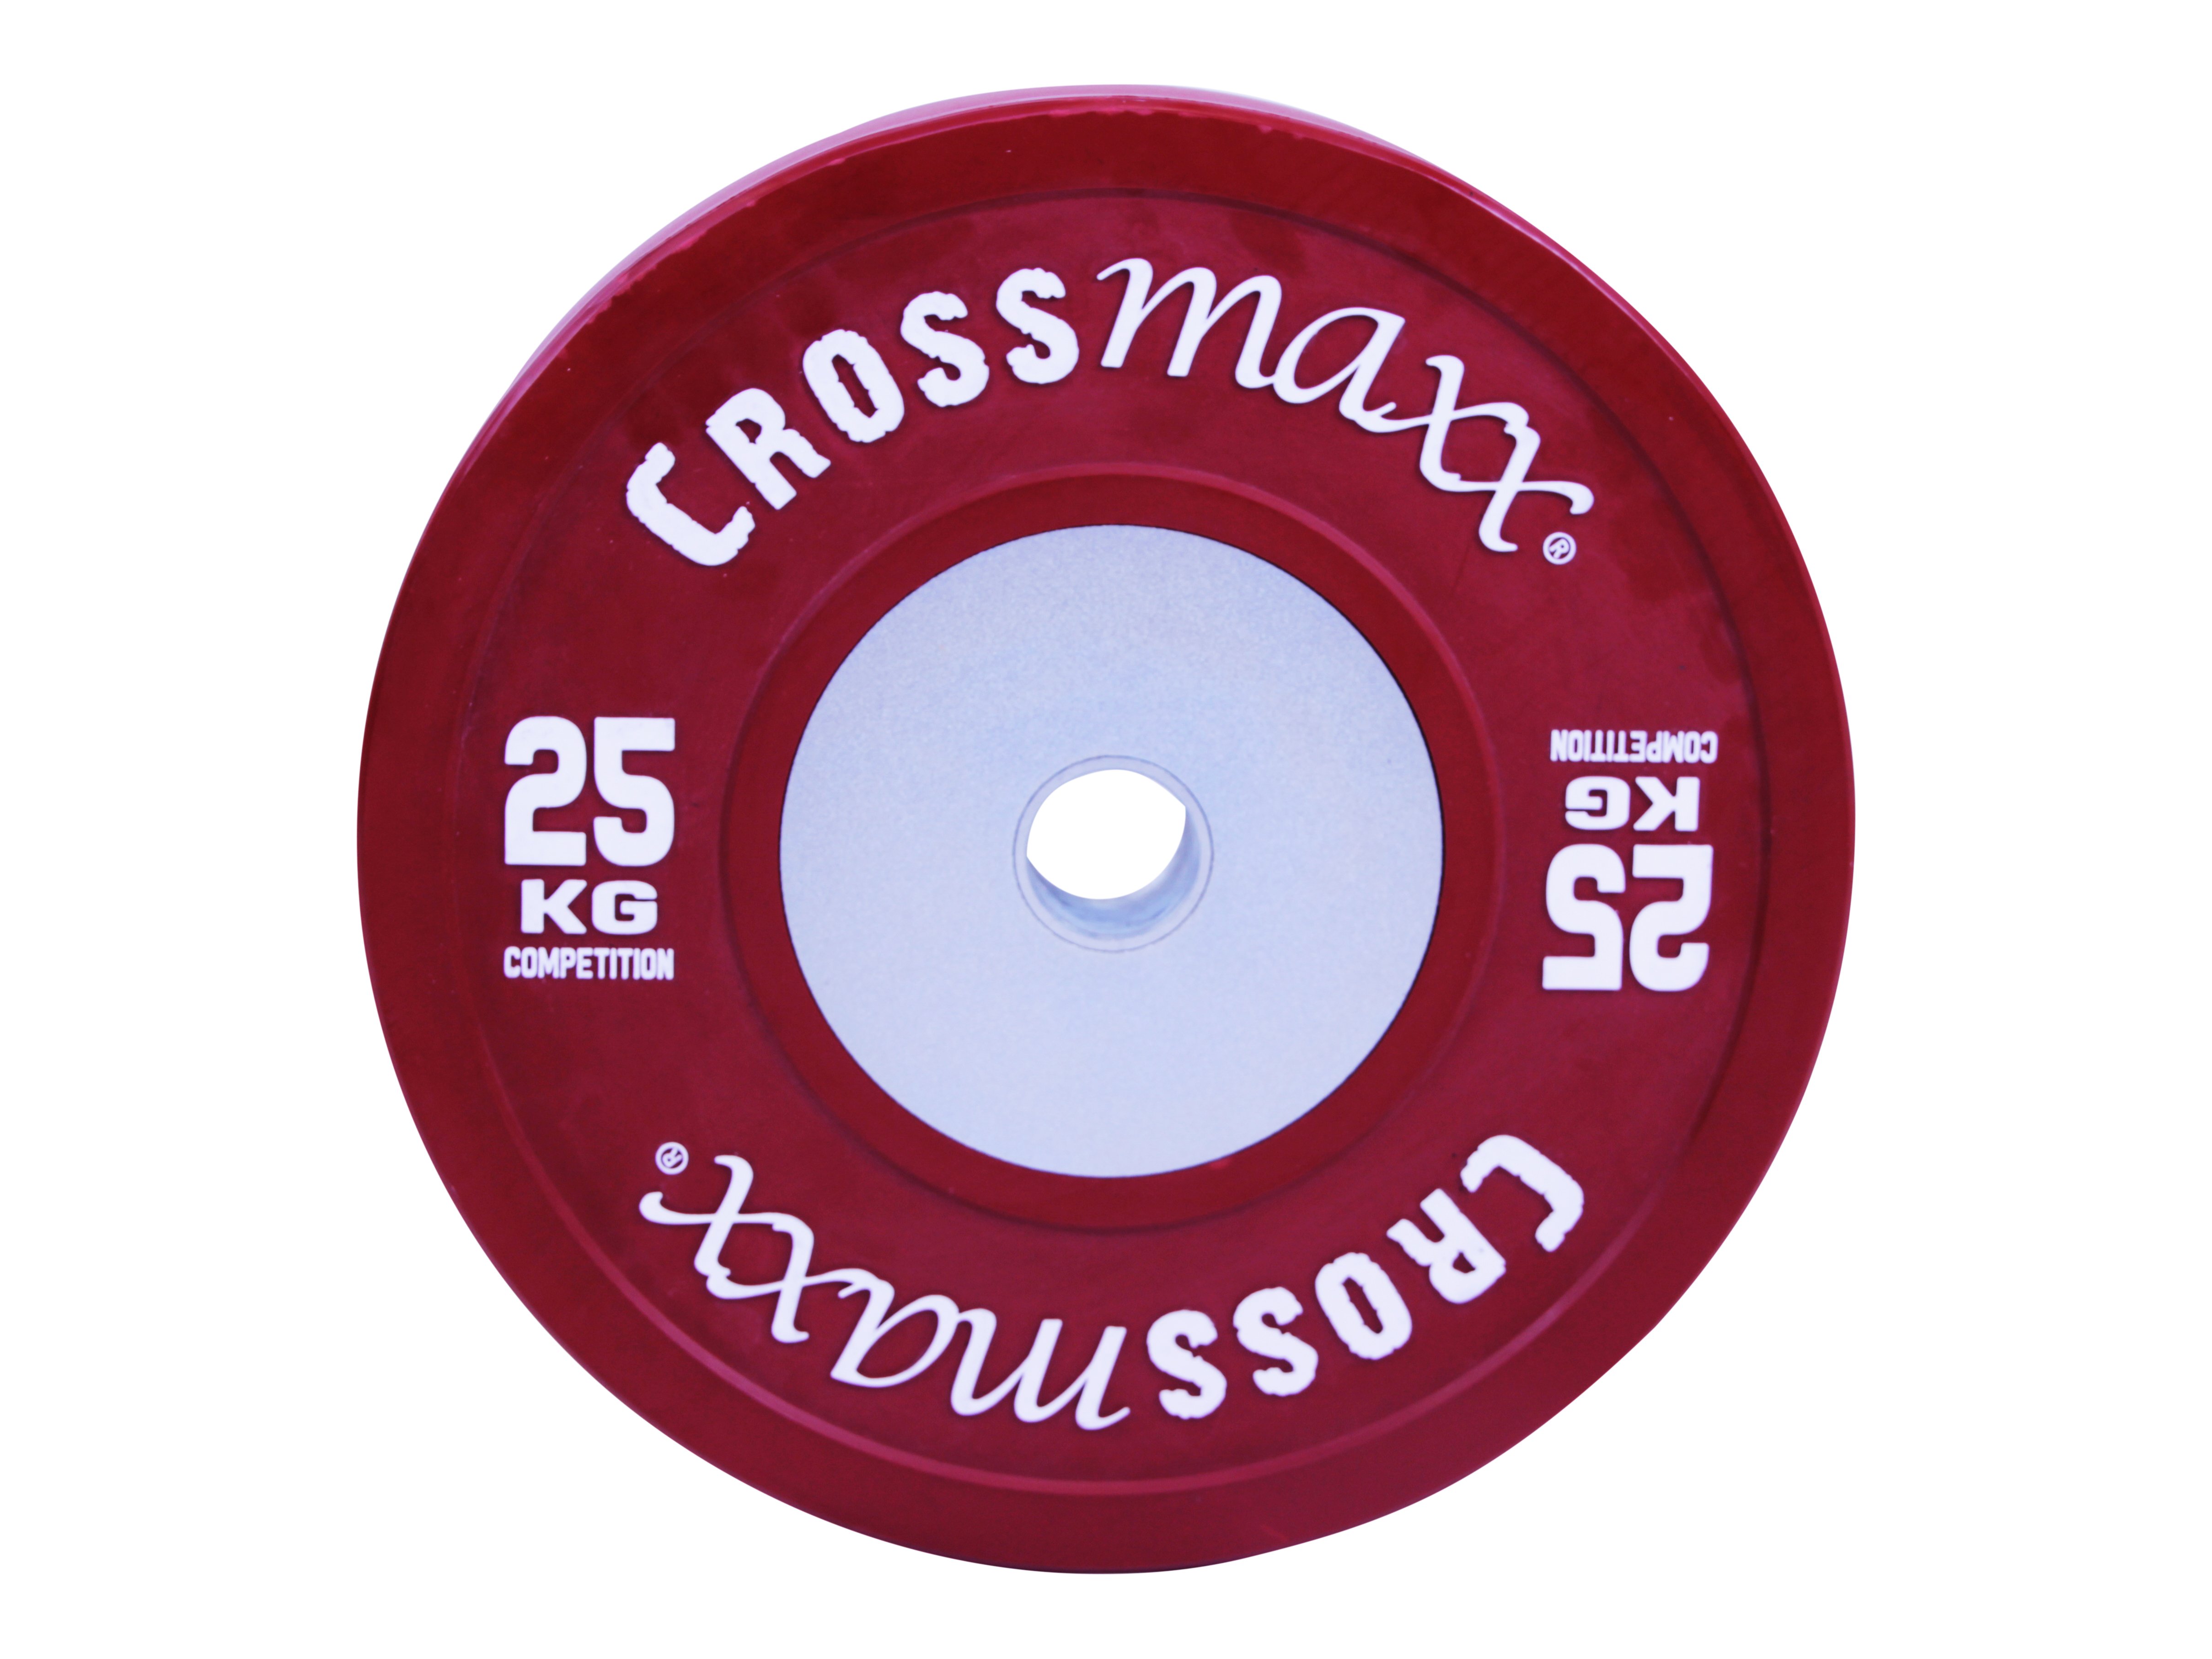 Crossmaxx Competition Bumper Plate 25 kg Red - Demo thumbnail